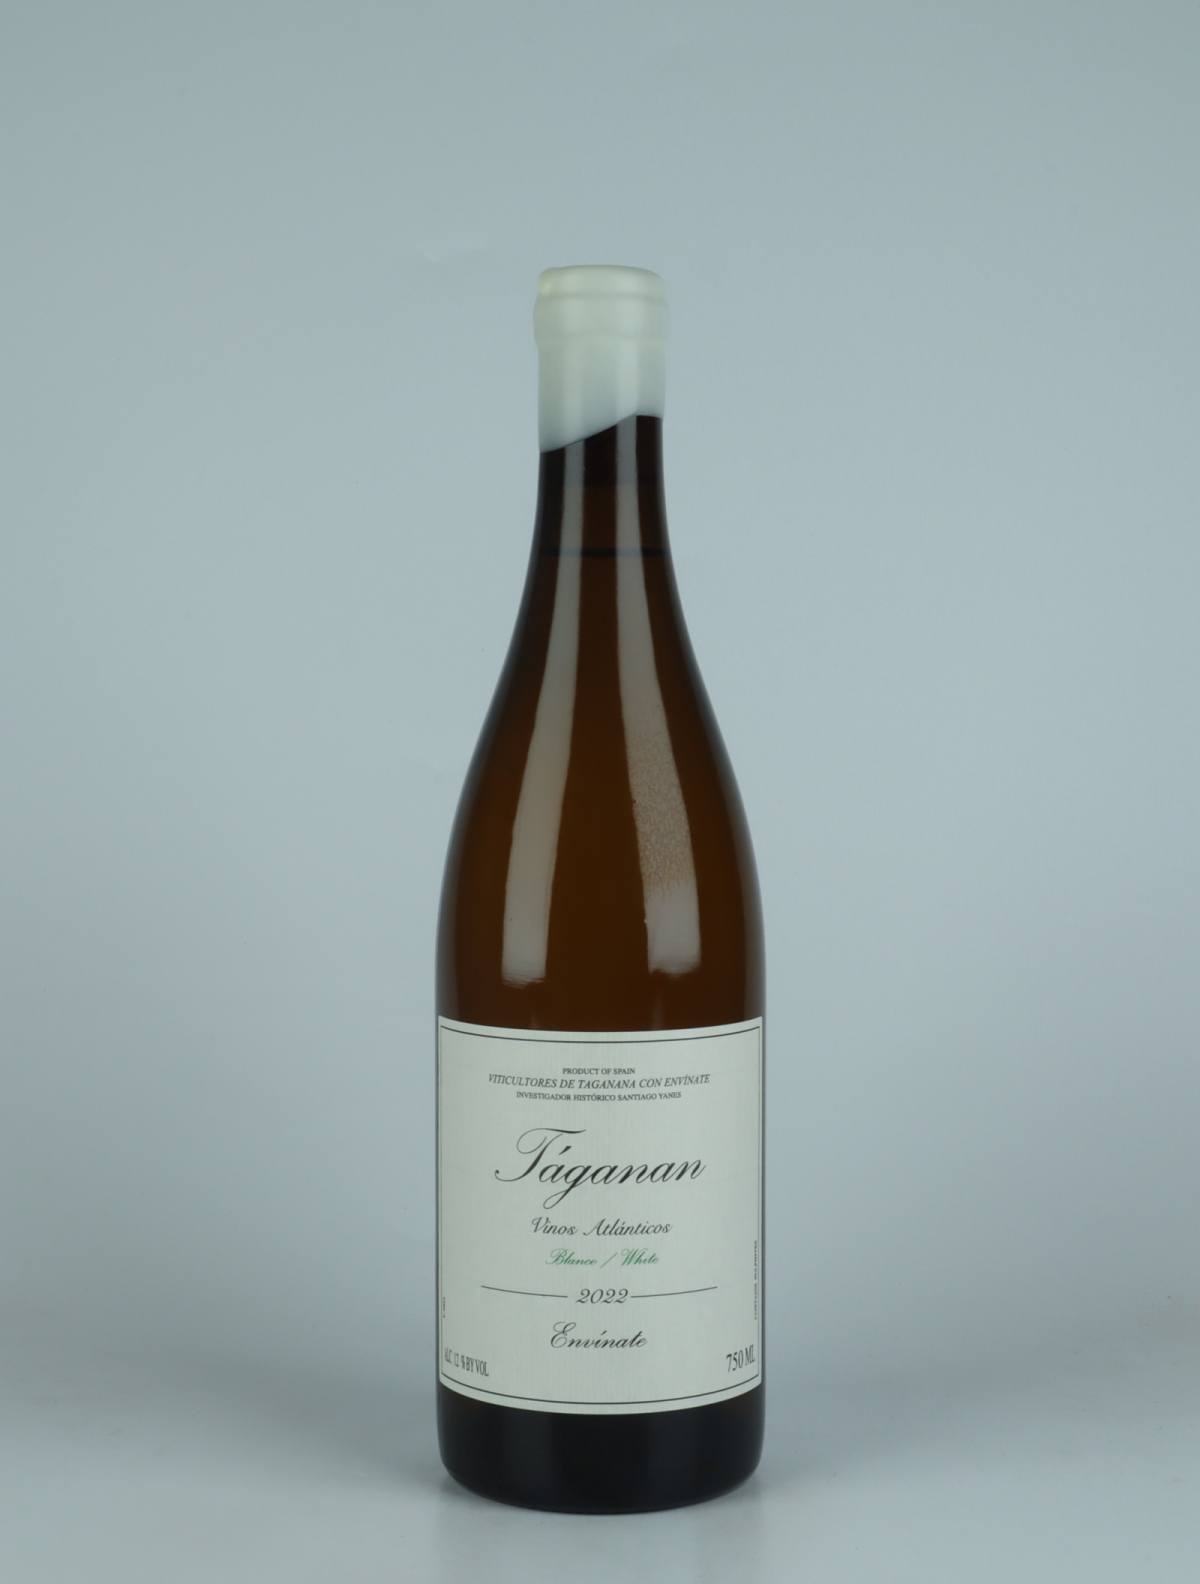 A bottle 2022 Taganan Blanco - Tenerife White wine from Envínate,  in Spain